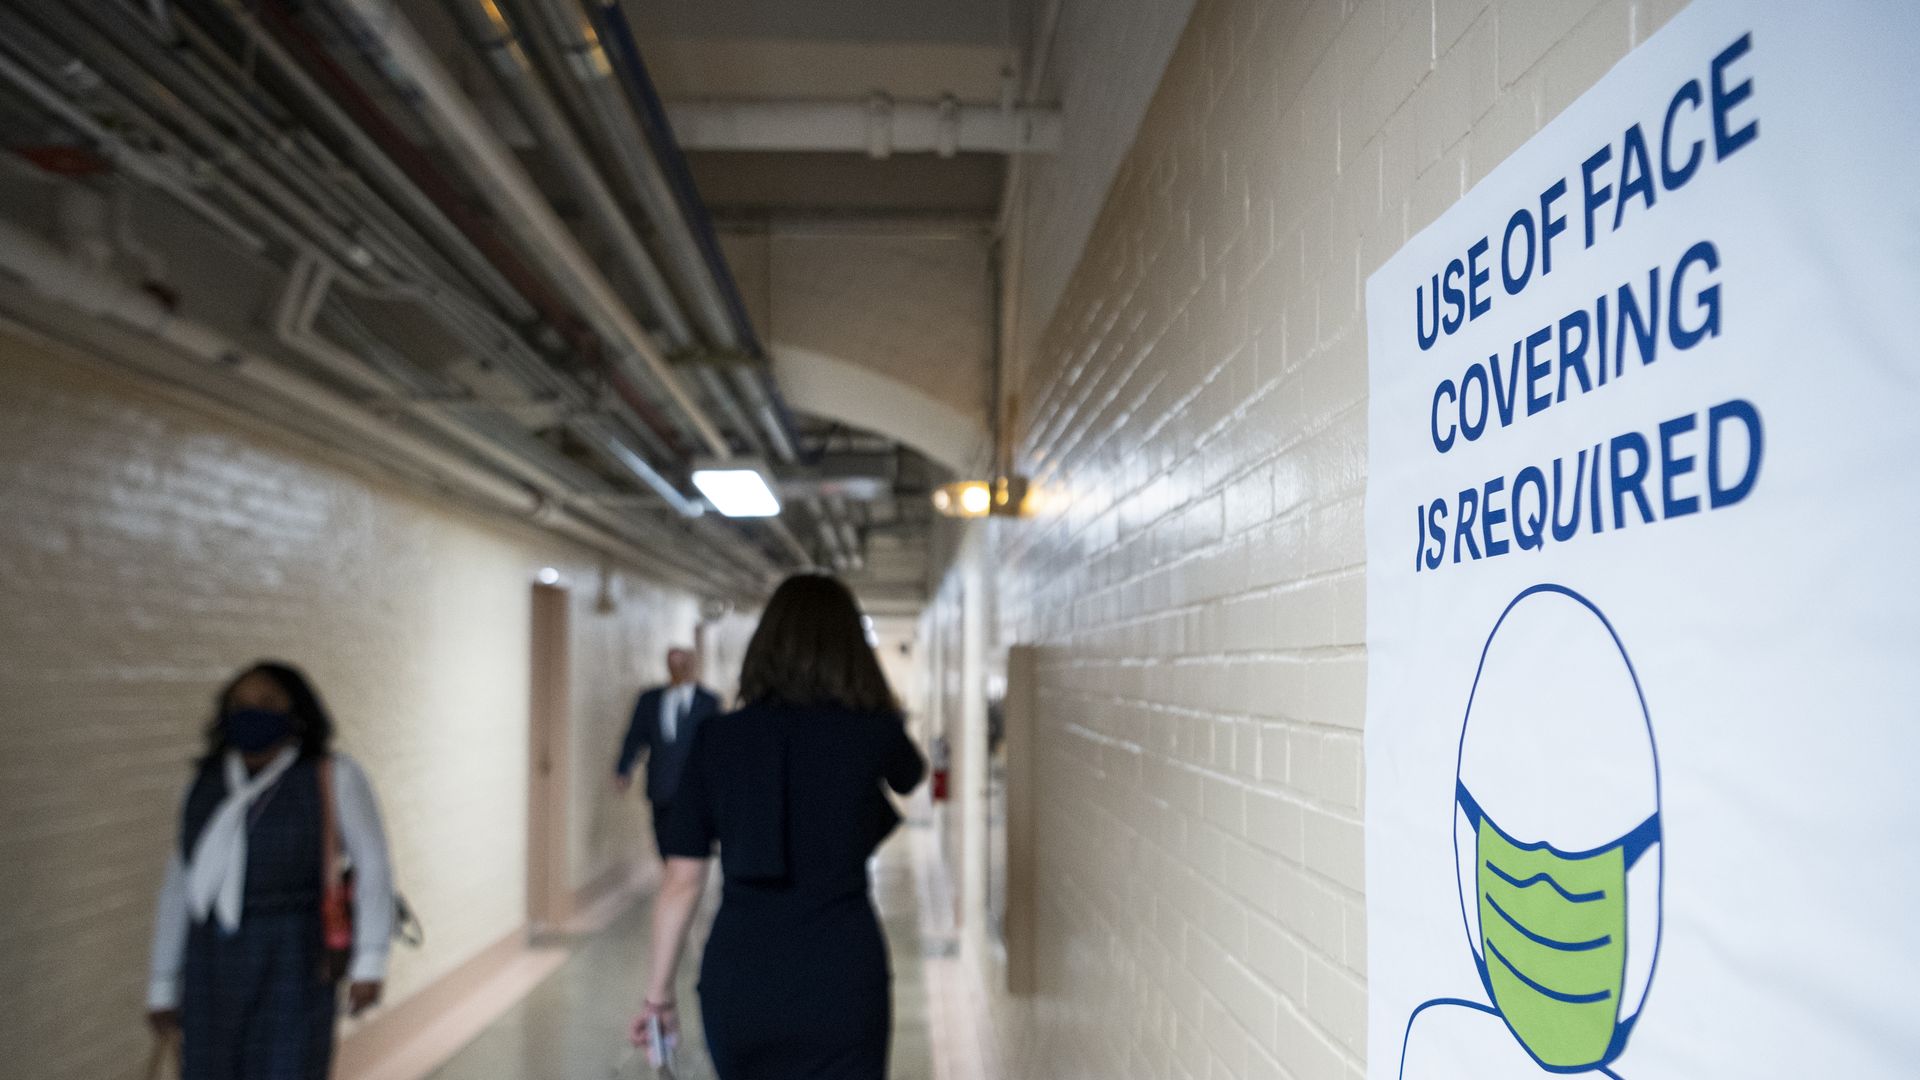 Photo of two people walking in a hallway as a sign that says "Use of face covering required" is taped to a wall